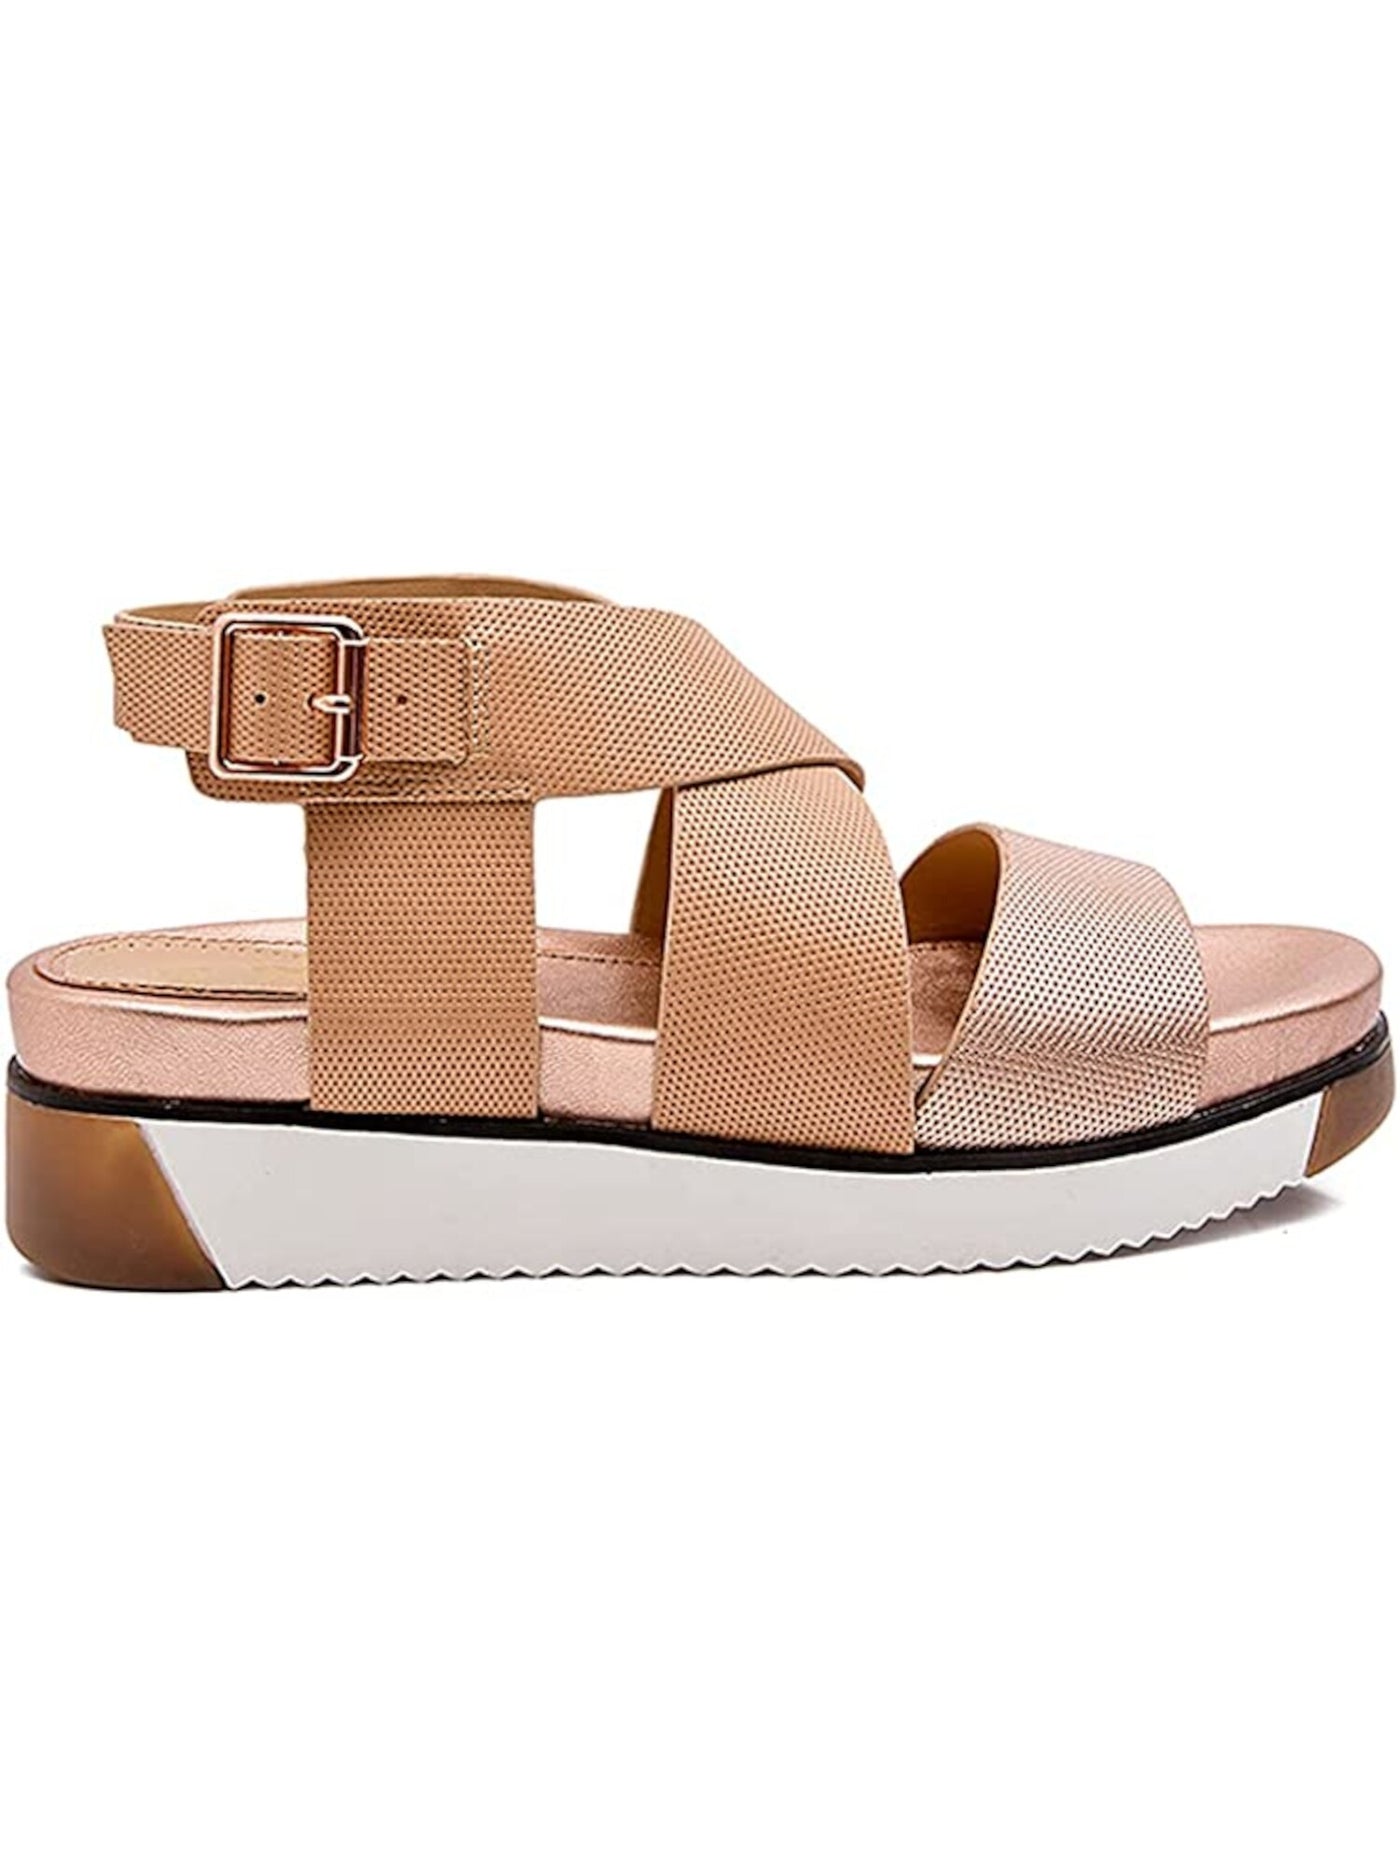 JANE AND THE SHOE Womens Gold Woven Texture Rose Gold Adjustable Strap Crisscross Straps Metallic Padded Harper Round Toe Wedge Buckle Slingback Sandal 7.5